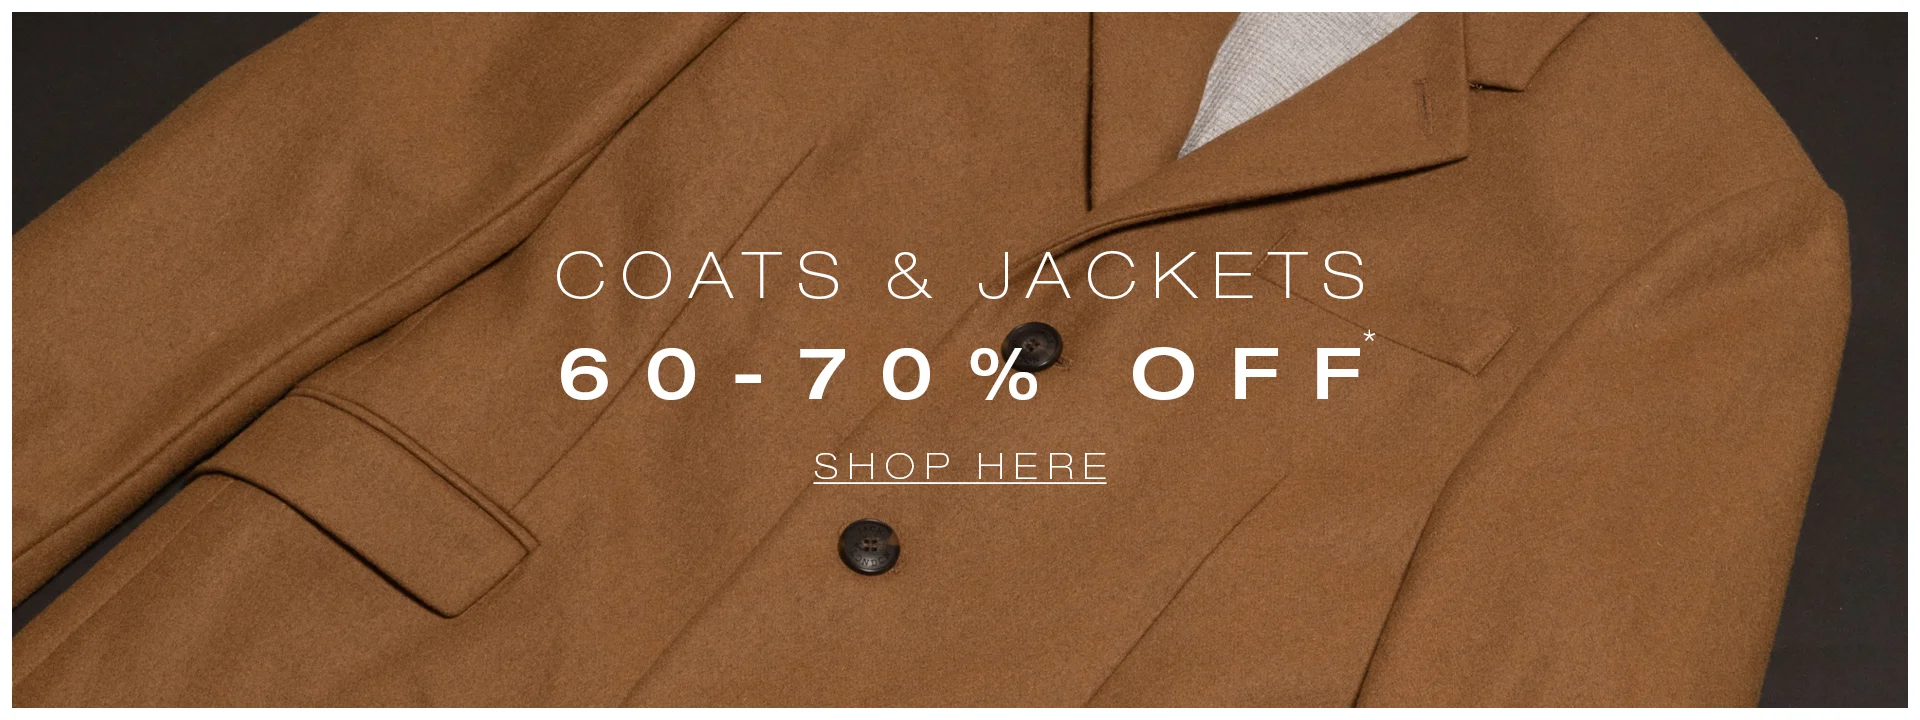 Save 60-70% OFF on coats & jackets